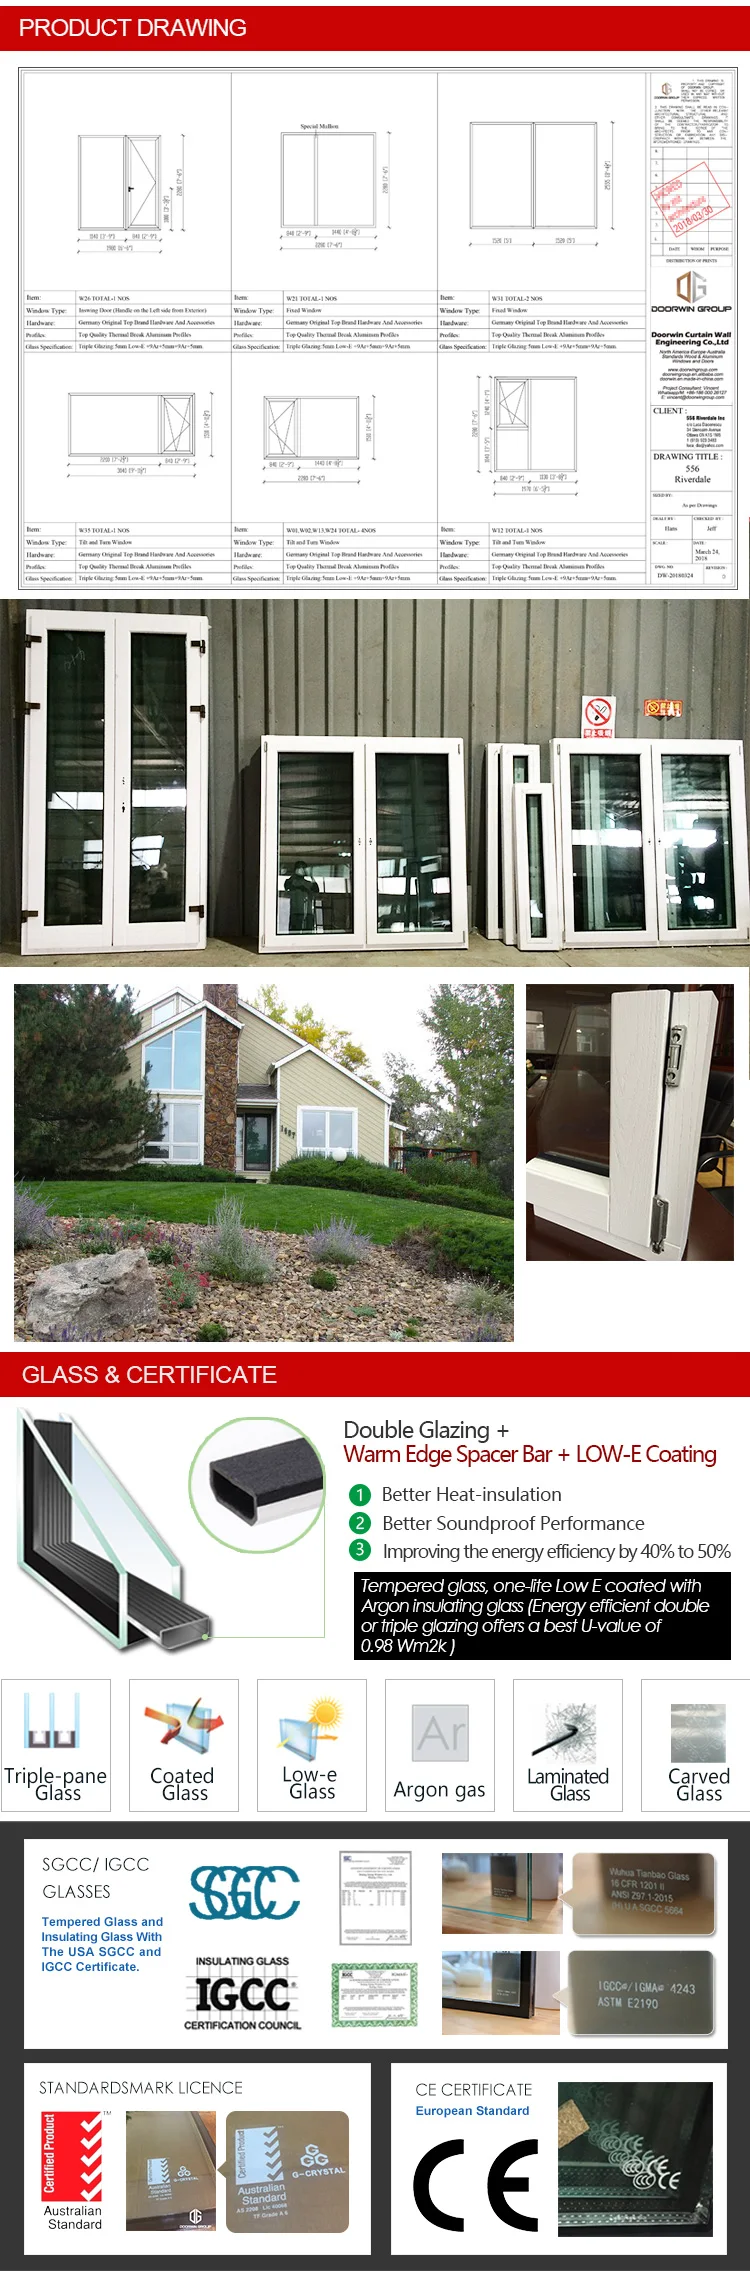 Wholesale window coating for energy efficiency who makes the most efficient windows best